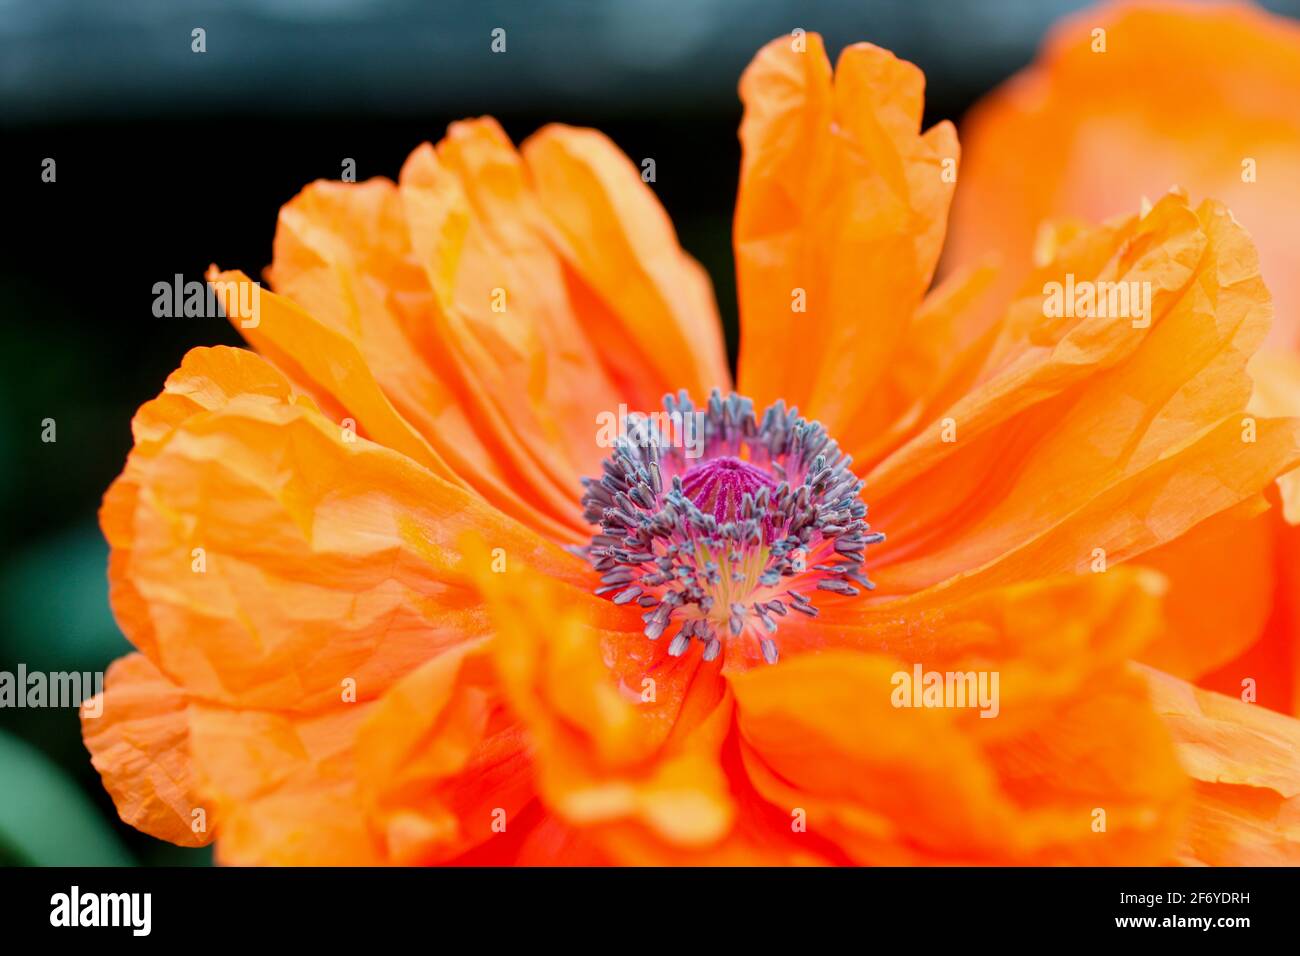 A bright orange poppy flower reveals it's purple center stigma while its delicate petals are completely opened up Stock Photo